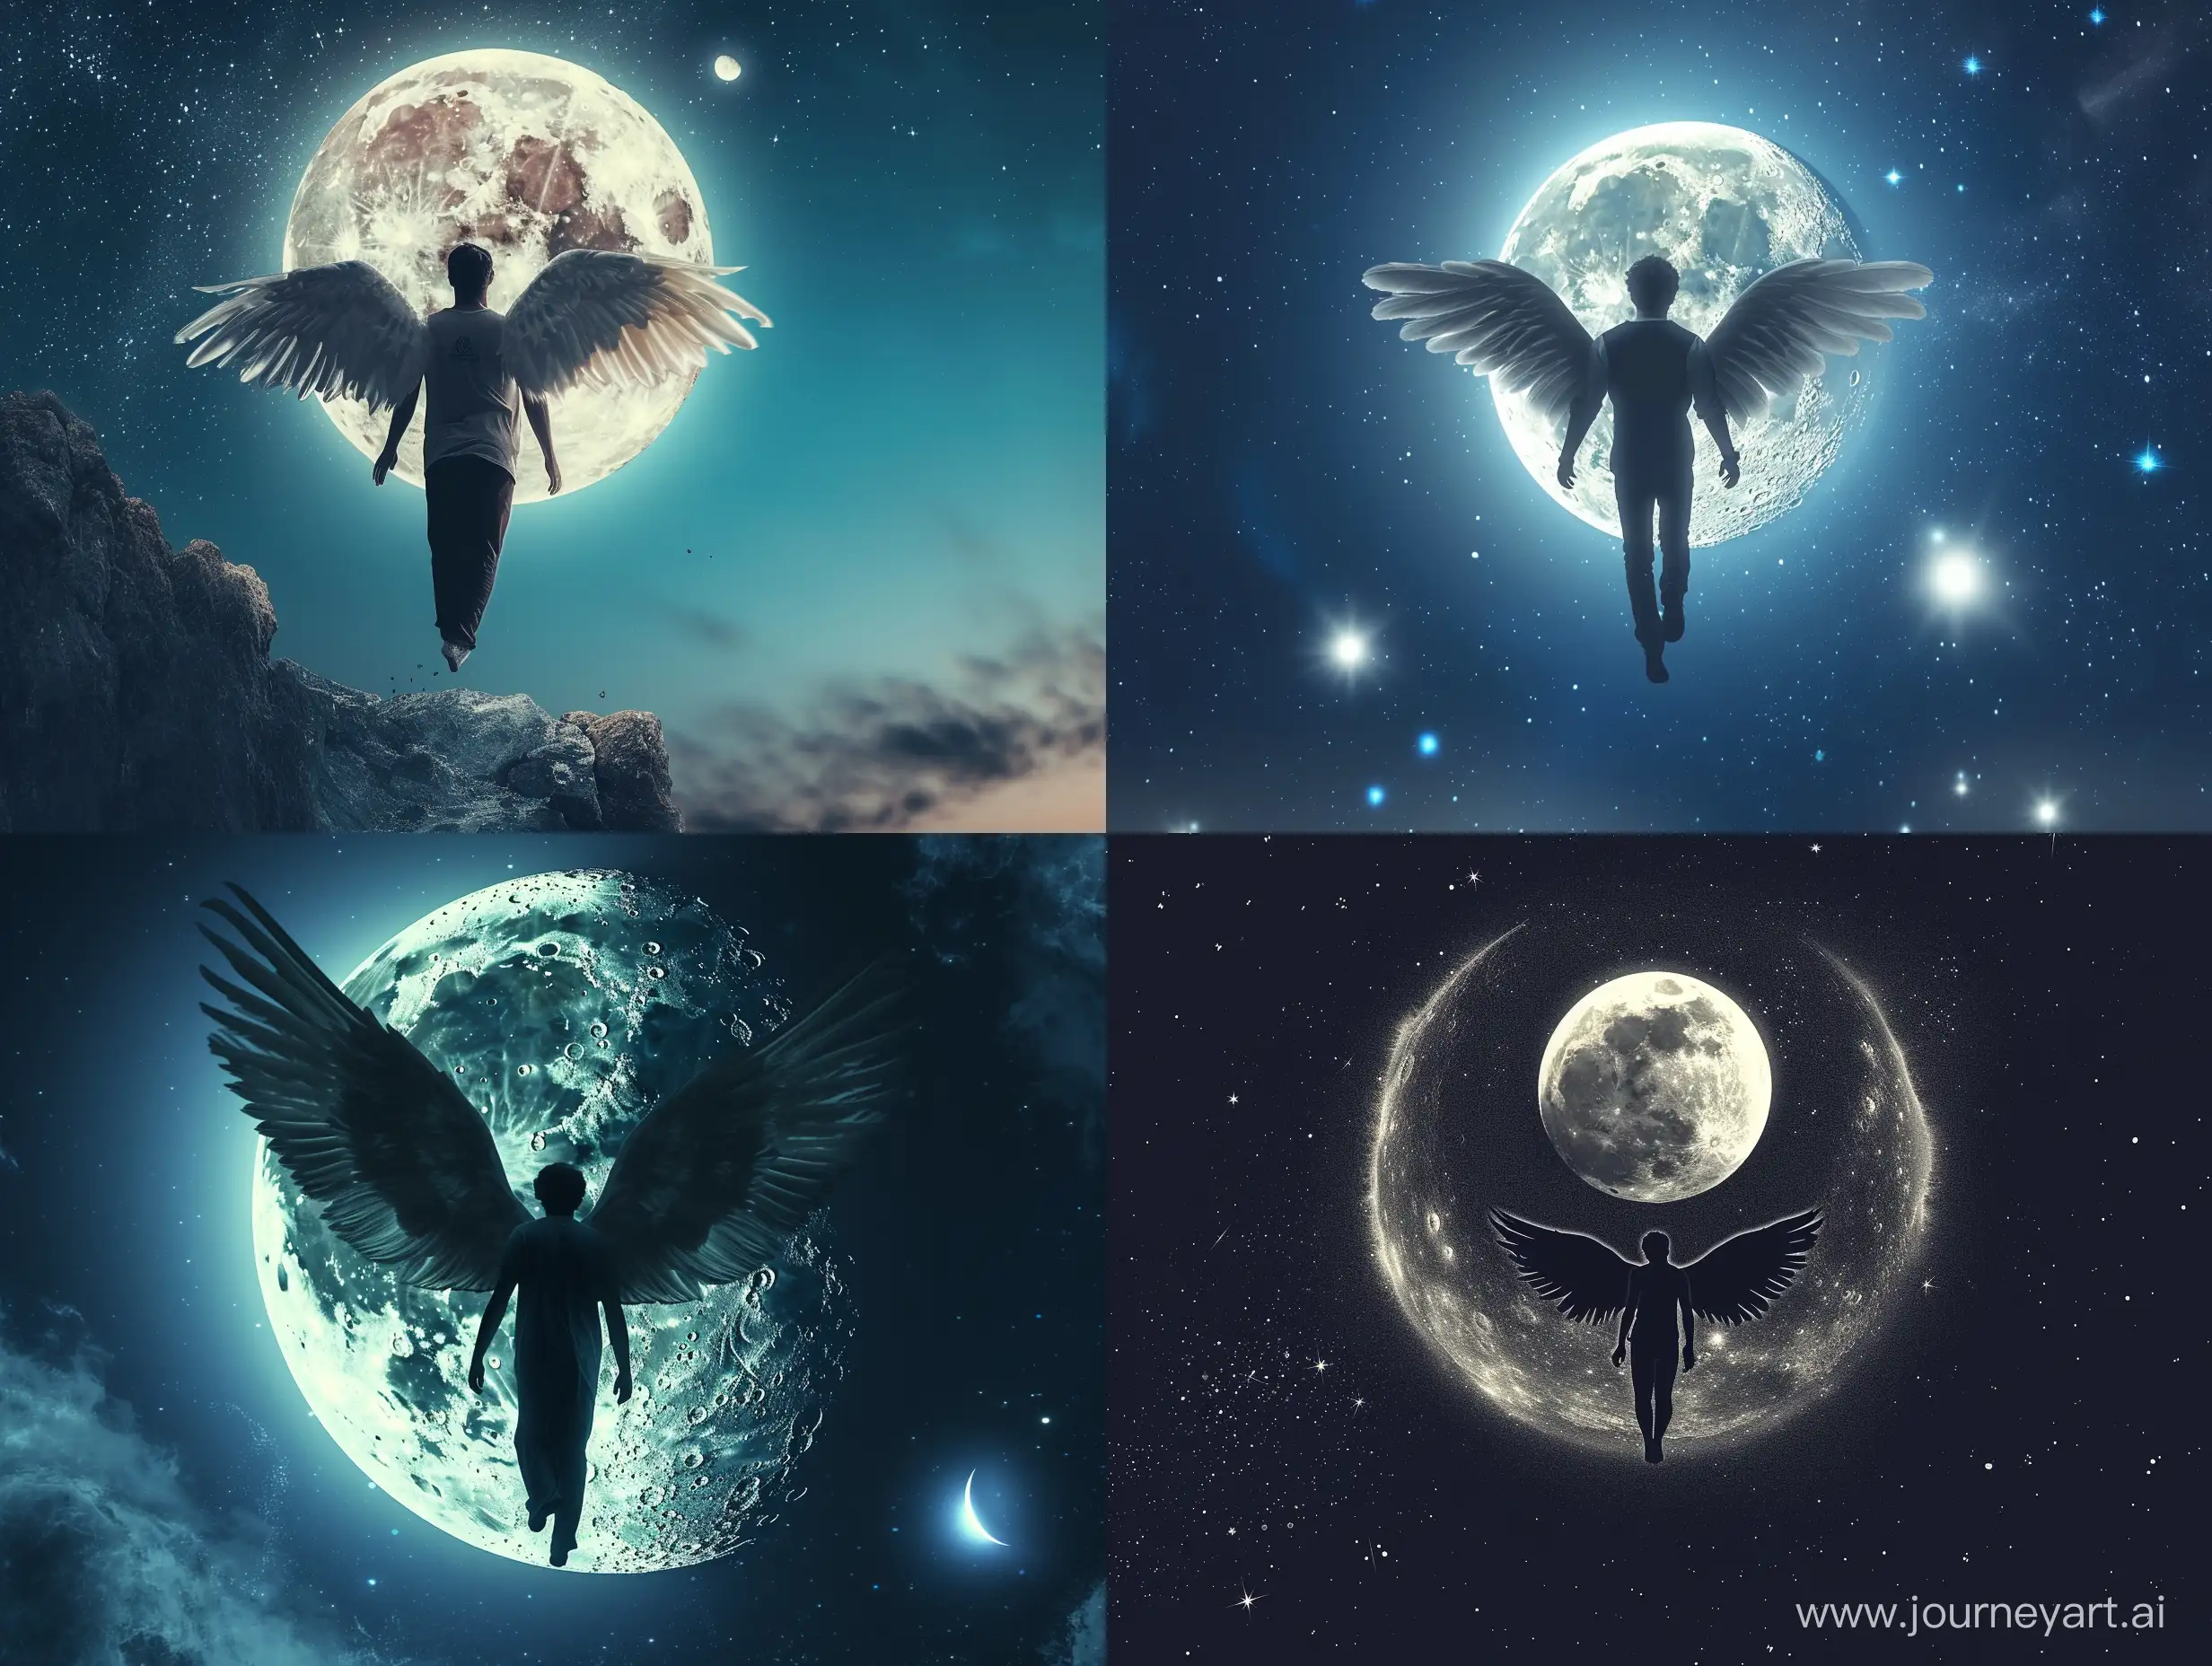 Man with angel wings flying to the moon